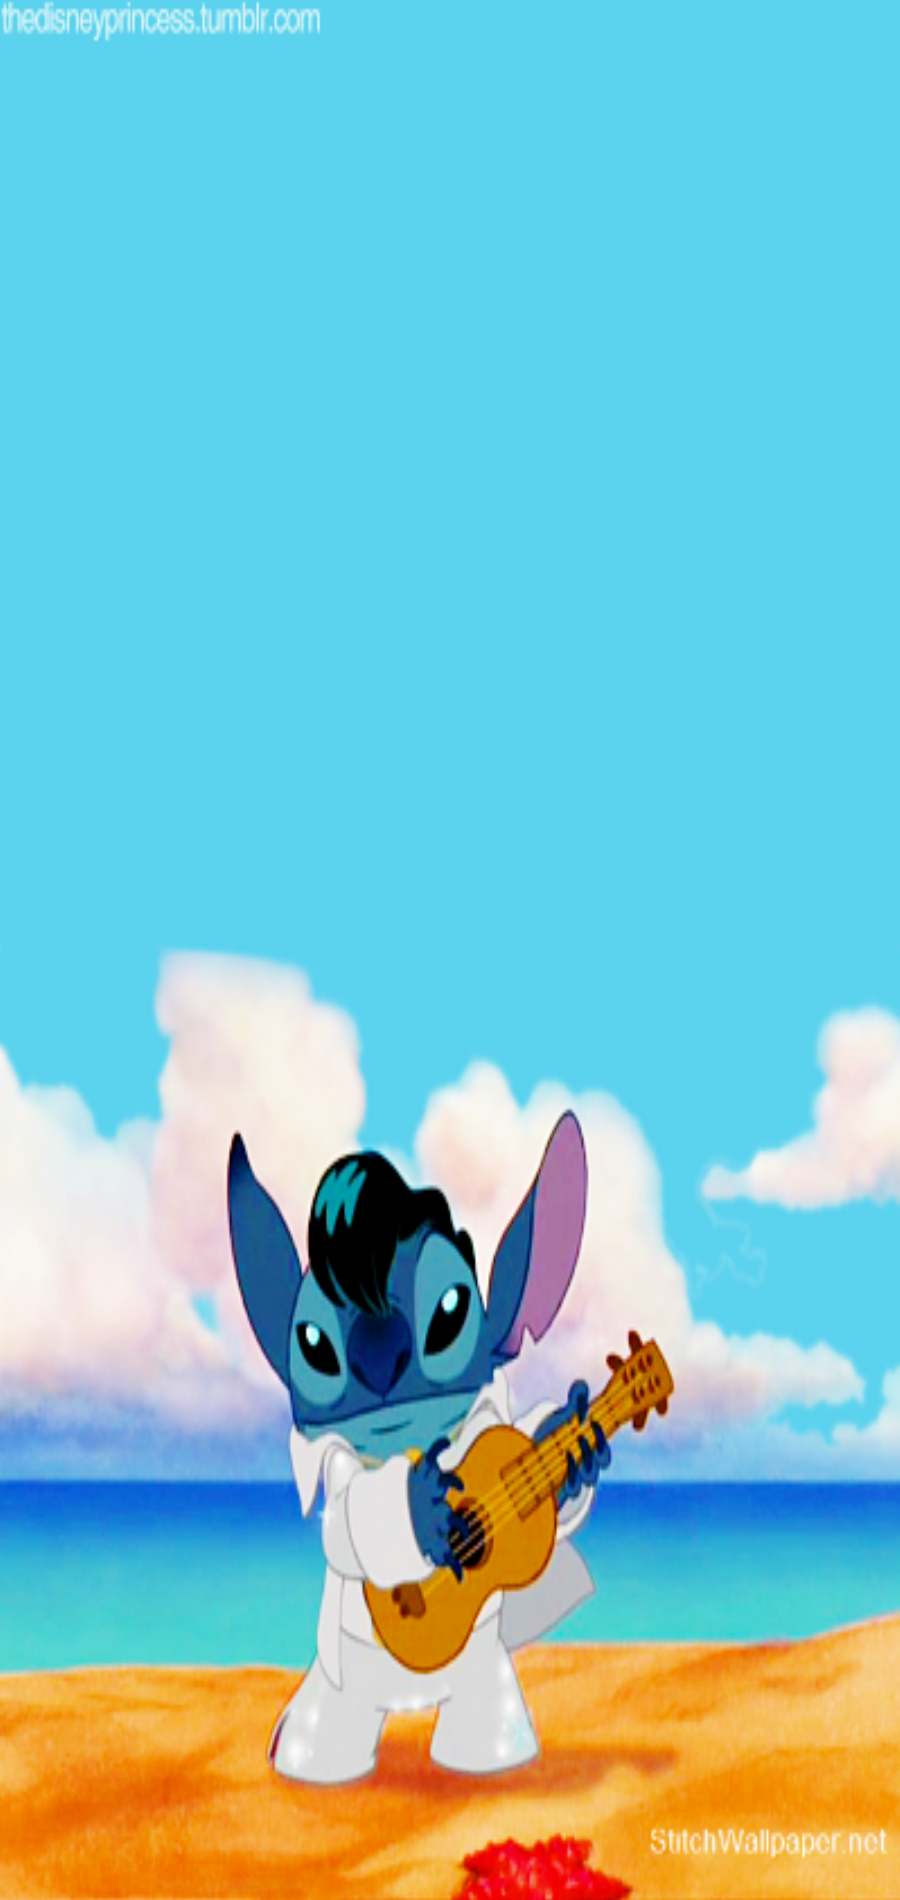 stitch wallpapers for your phone